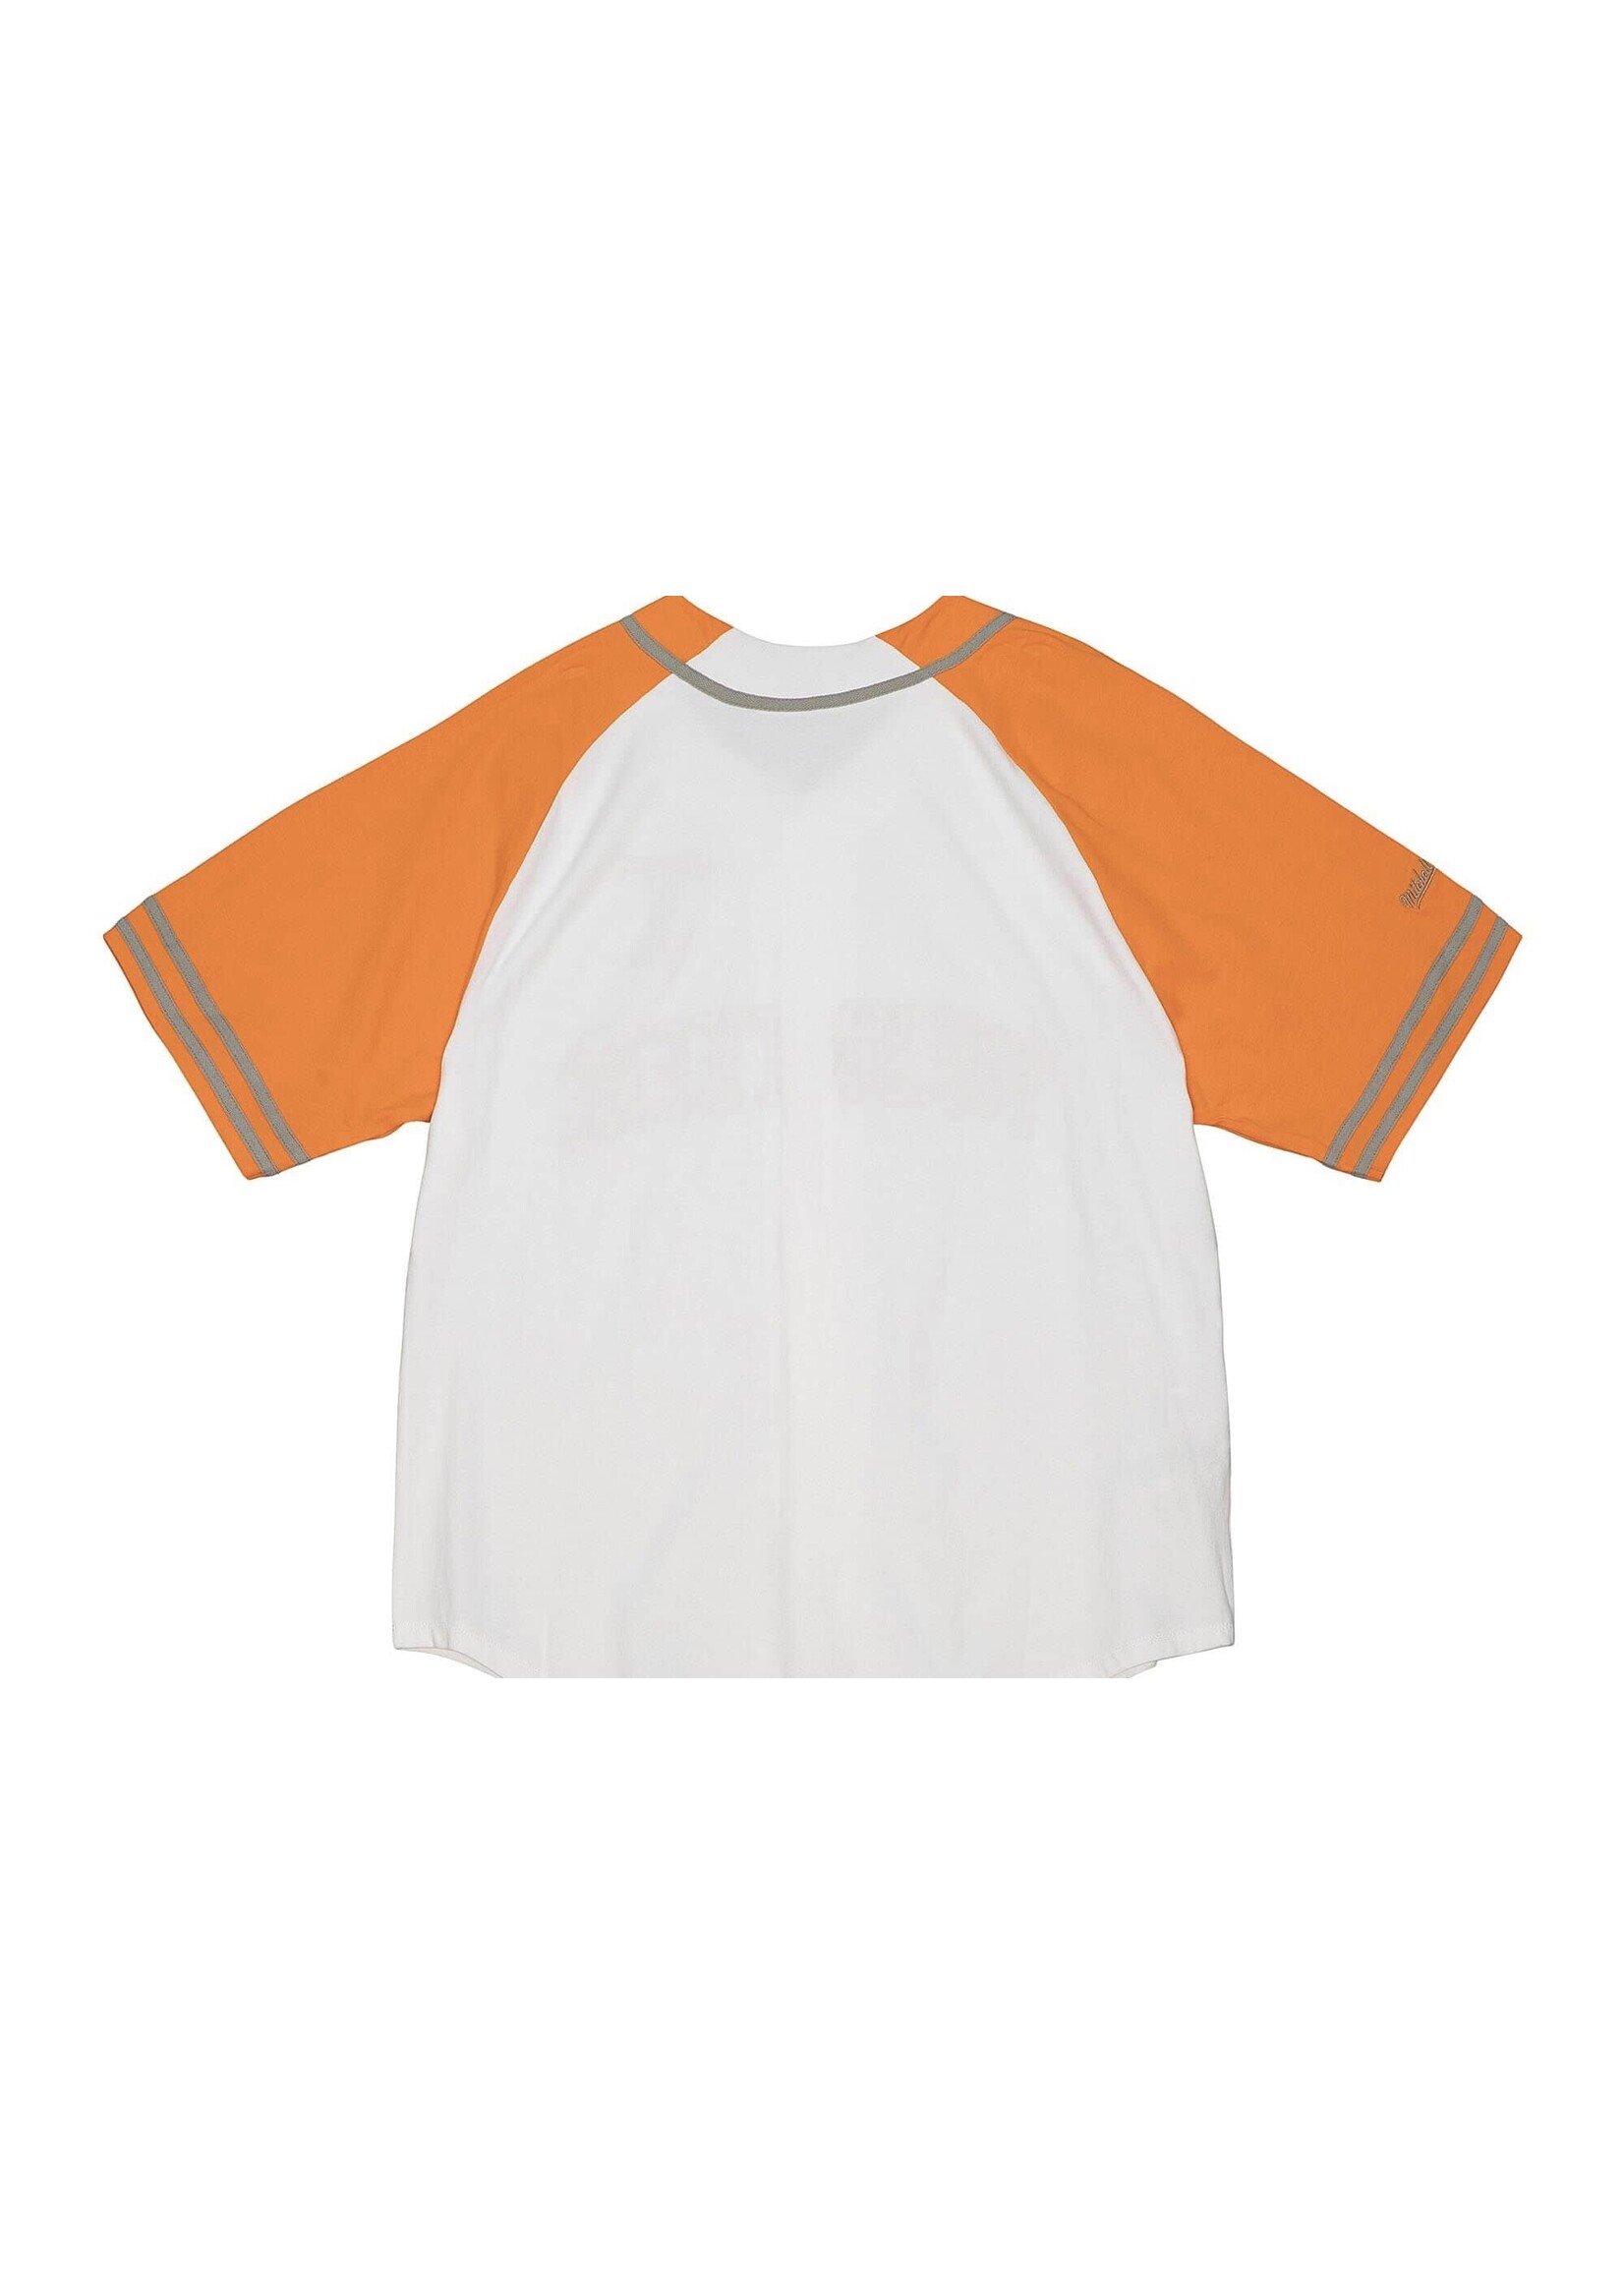 Mitchell & Ness University of Tennessee Practice Jersey